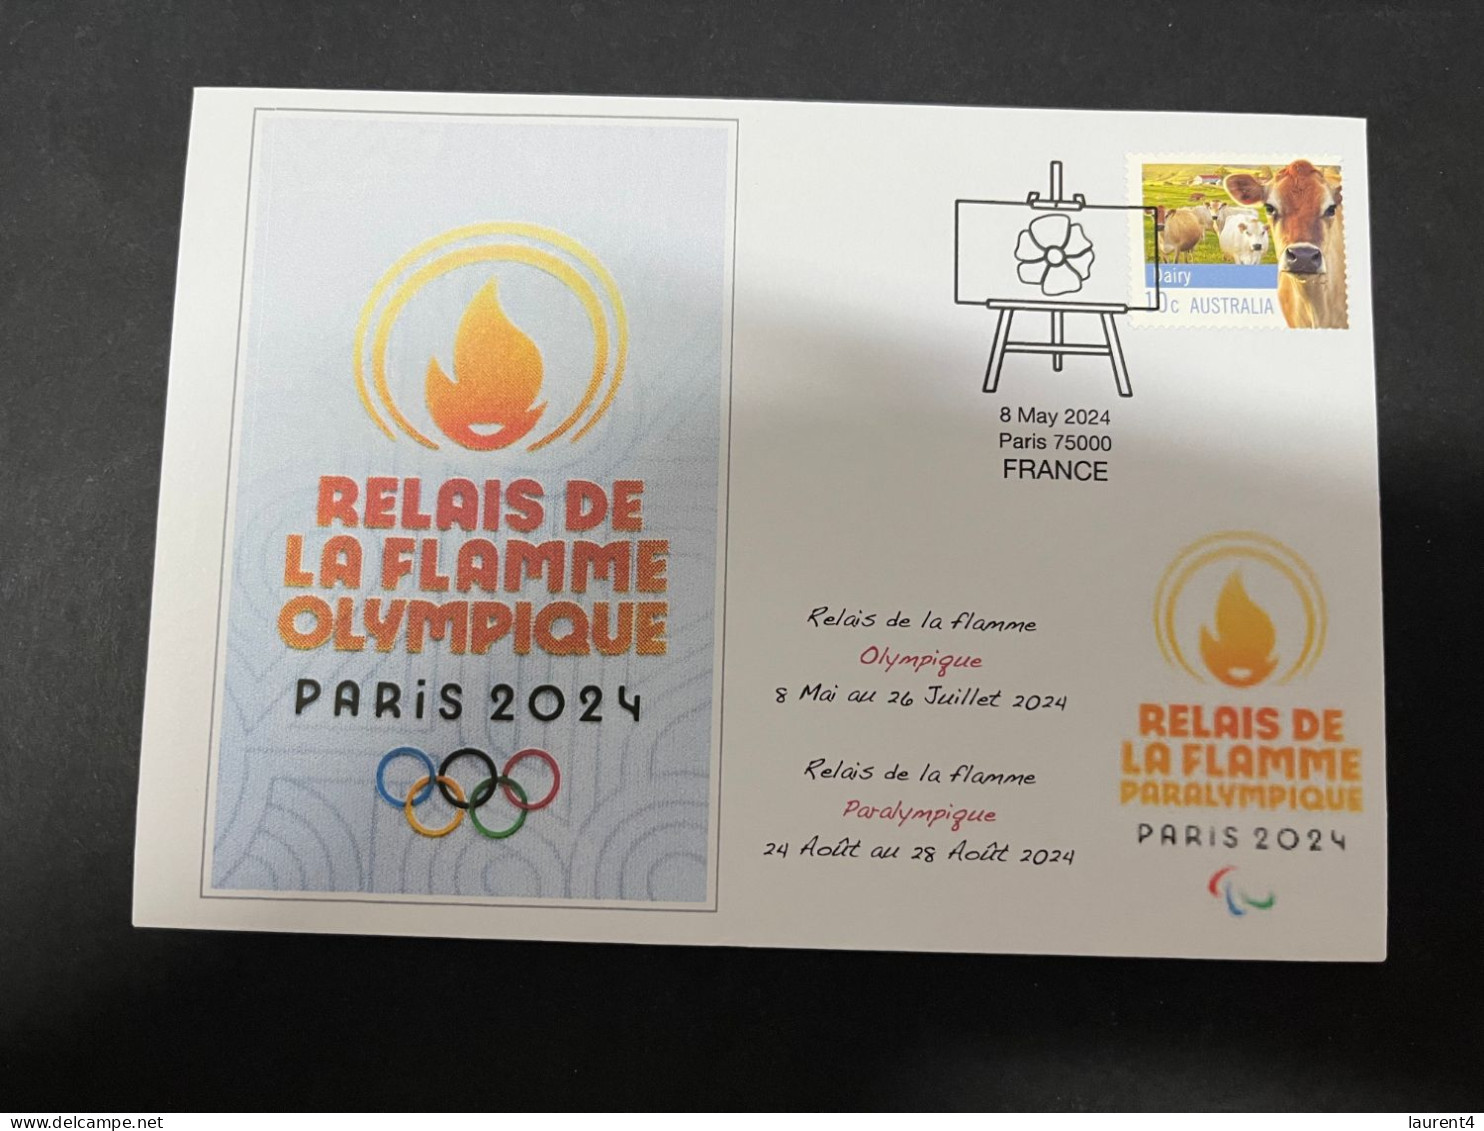 15-5-2024 (5 Z 12) Paris Olympic Games 2024 - Torch Relay In France (with OZ Stamp) - Eté 2024 : Paris